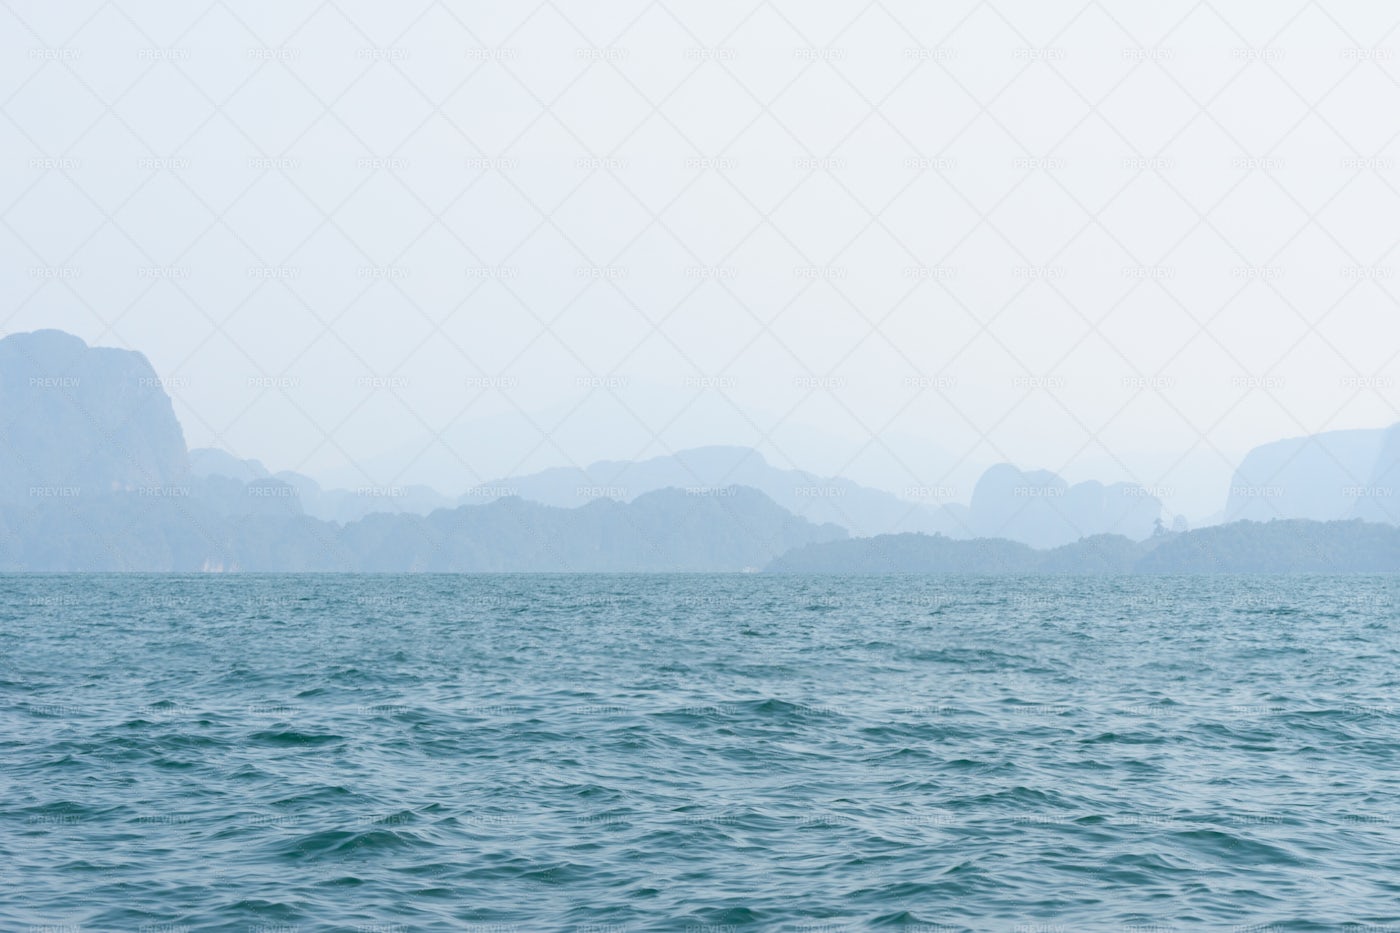 Blue Sea Water And Mountains: Stock Photos